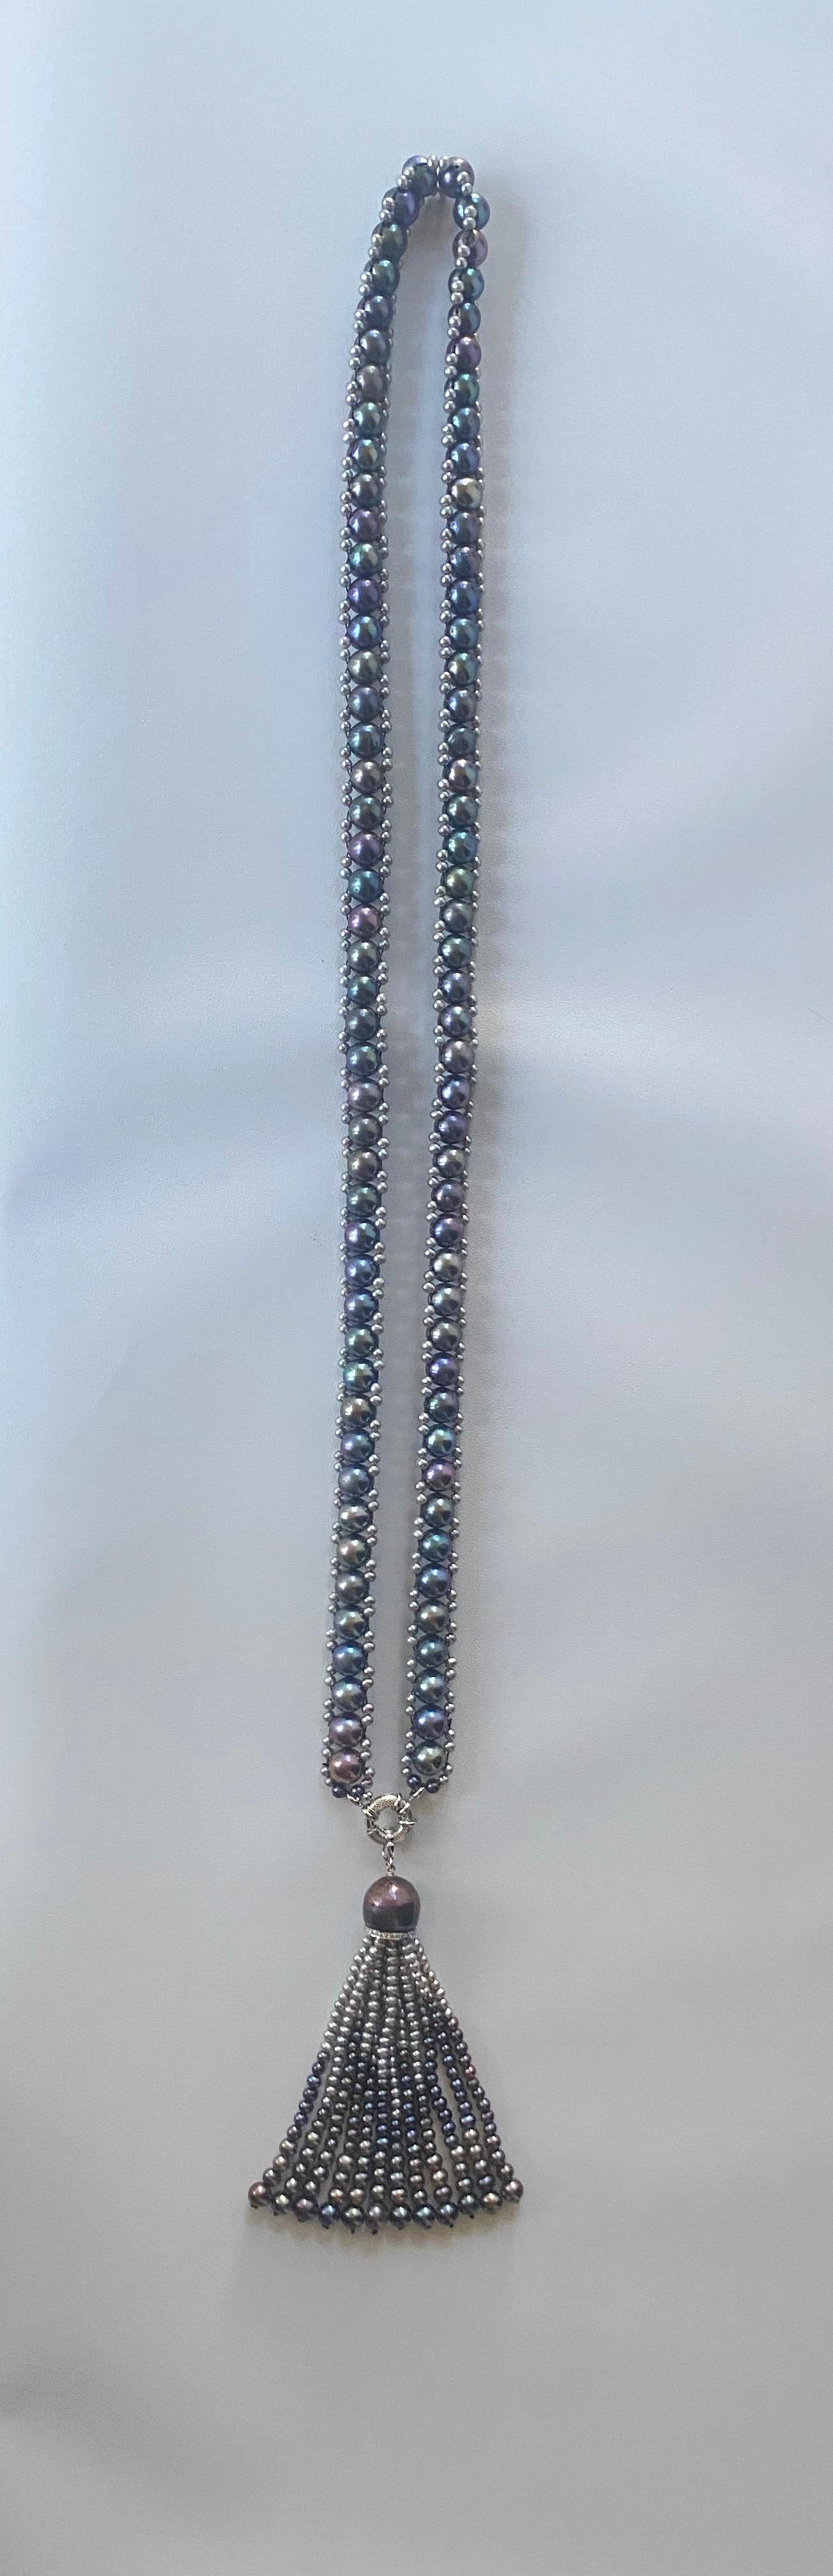 Marina J. Black & Grey Pearl Woven Lariat with 14k White Gold For Sale 4